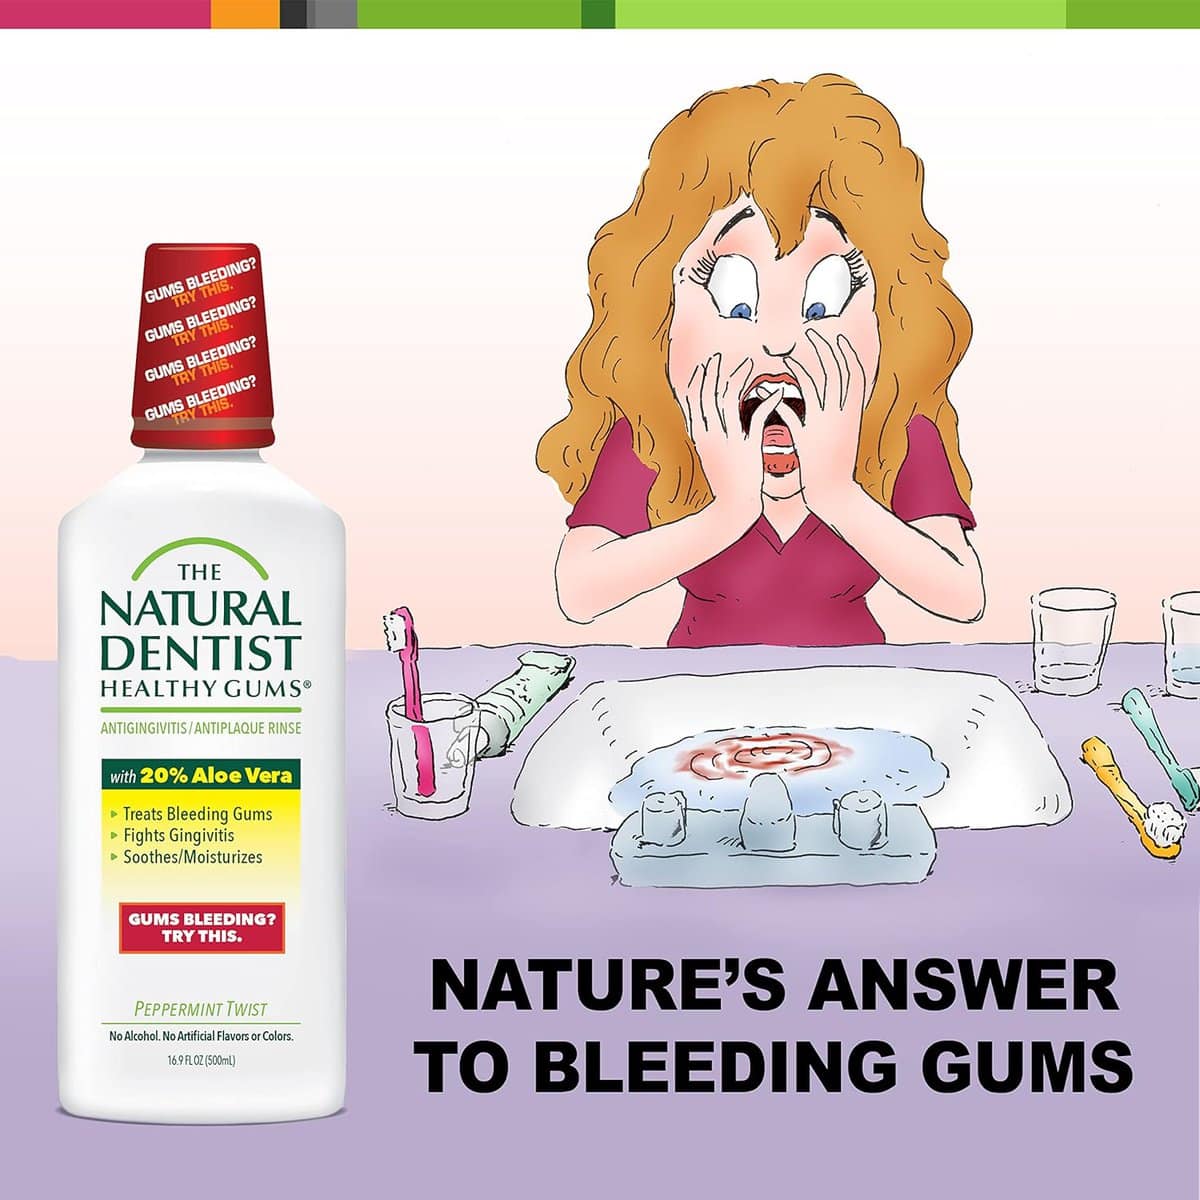 The Natural Dentist Healthy Gums Rinse Review: Best Antigingivitis Mouthwash for Chemotherapy Patients with Aloe Vera – Alcohol-free and Safe Treatment for Bleeding Gums in Adults 12 & Up!